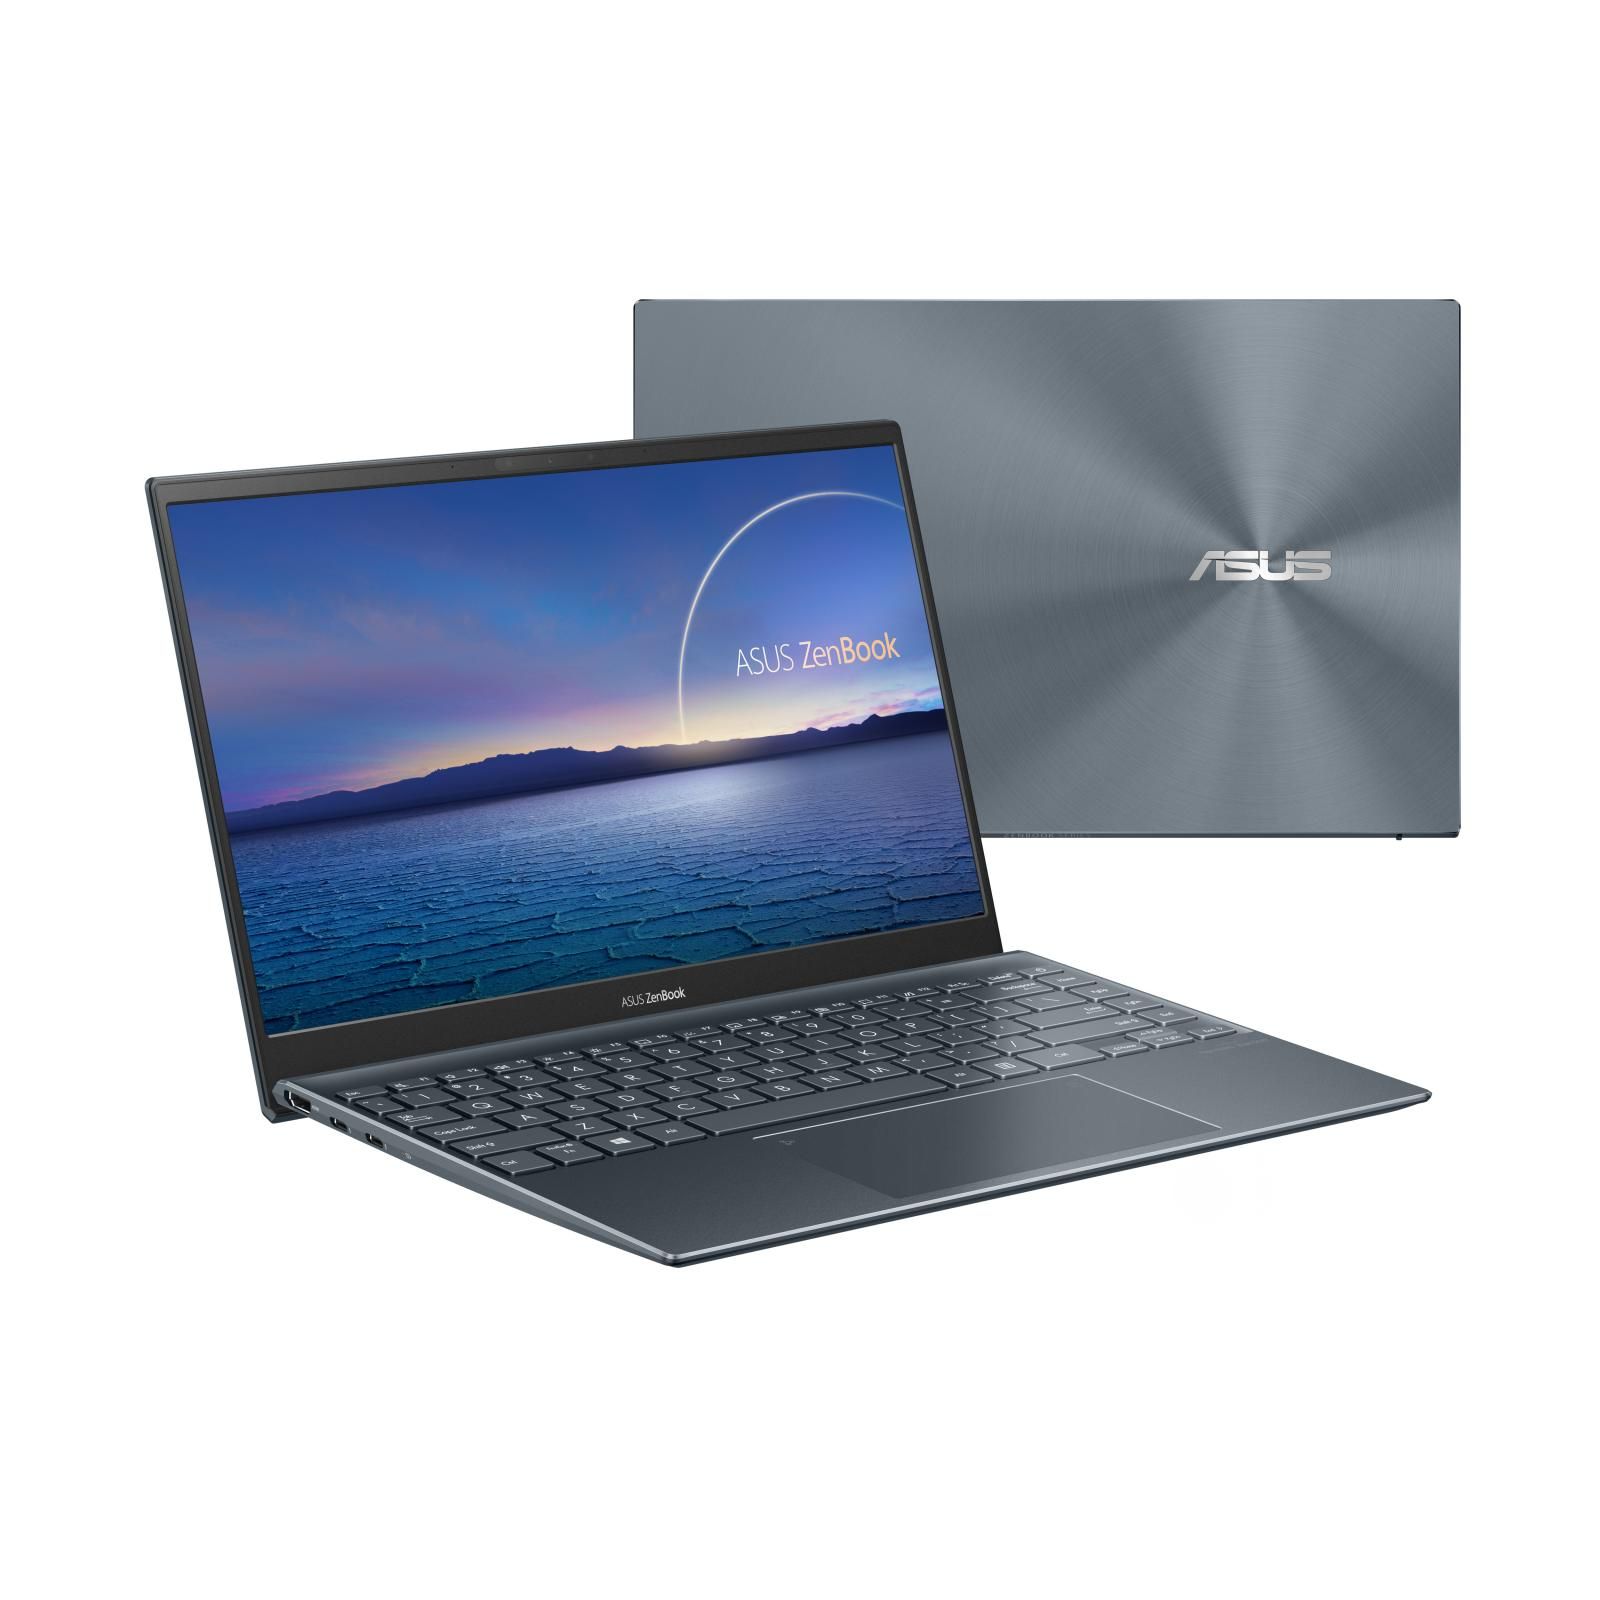 ASUS ZenBook Pro 15 OLED Laptop is currently 36 percent off